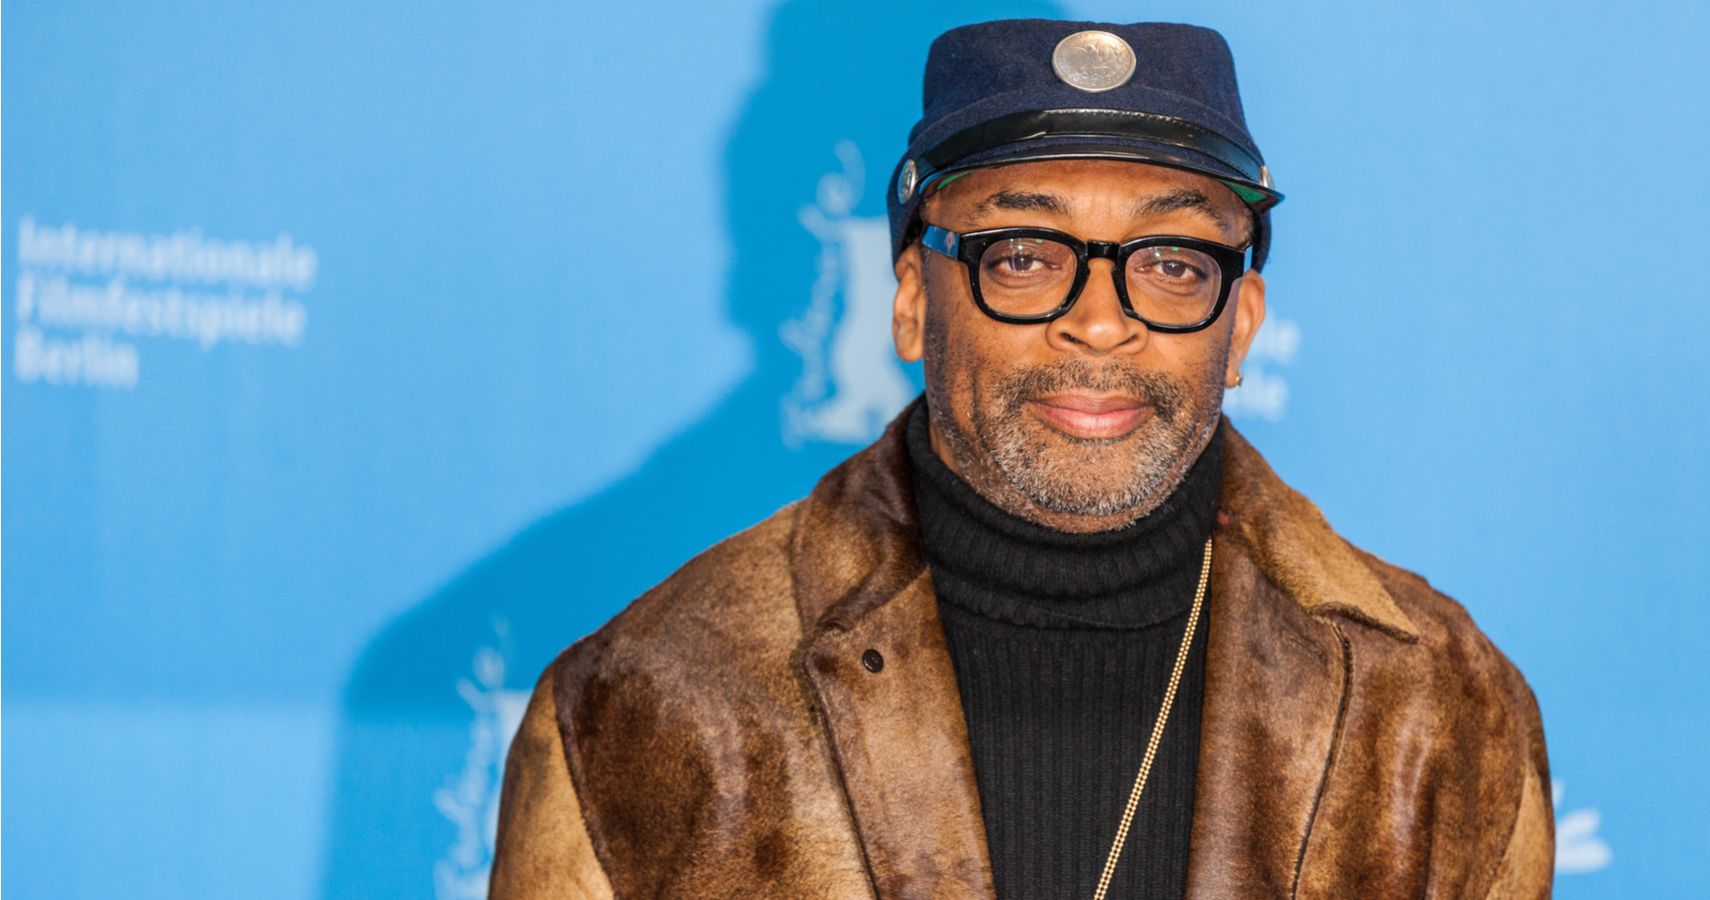 https://static1.therichestimages.com/wordpress/wp-content/uploads/2022/02/An-Image-Of-Spike-Lee.jpg